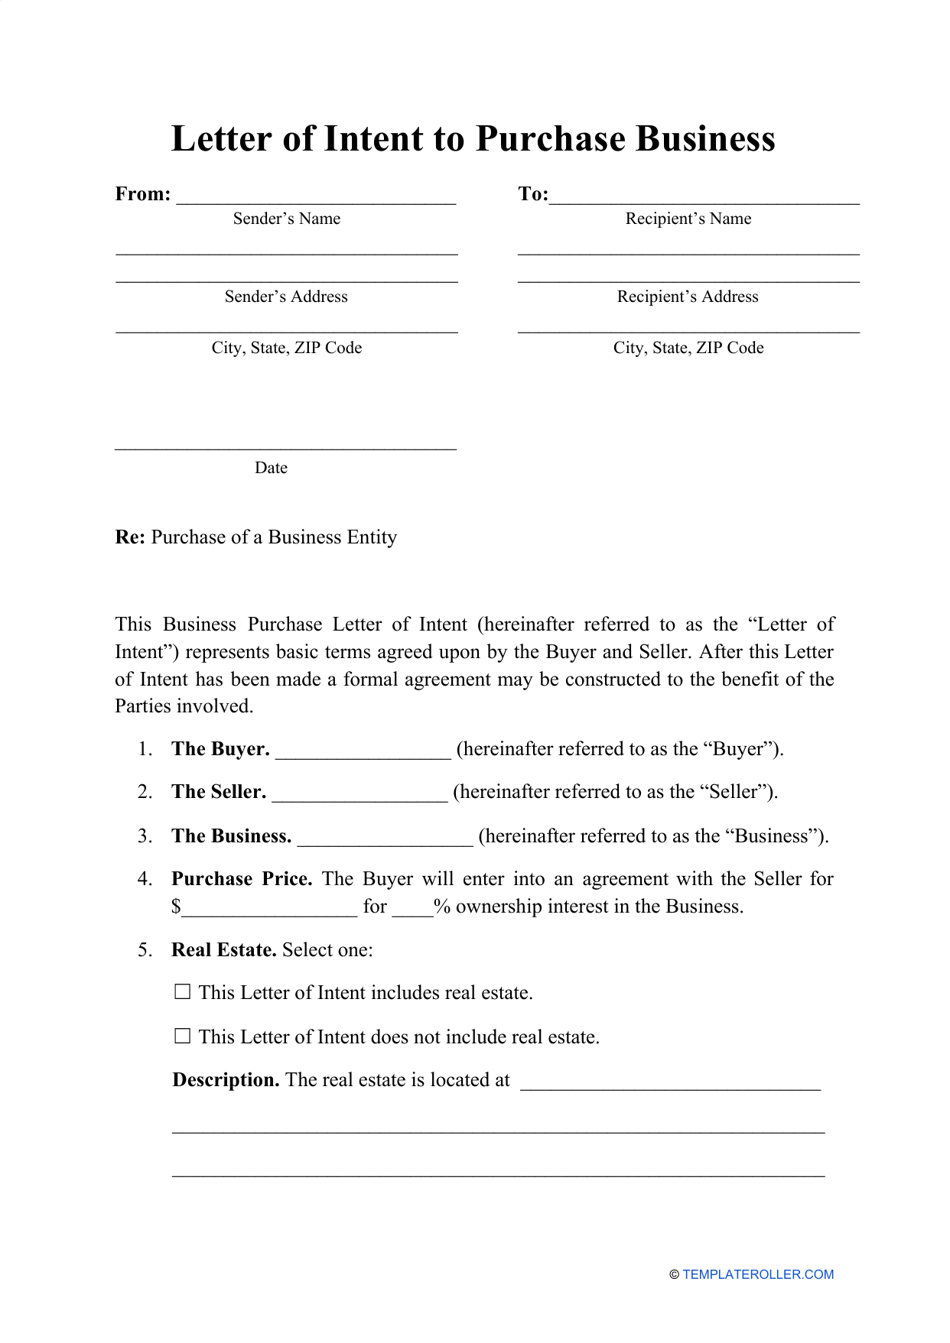 Letter of Intent to Purchase Business Template Download Printable In offer to purchase business agreement template